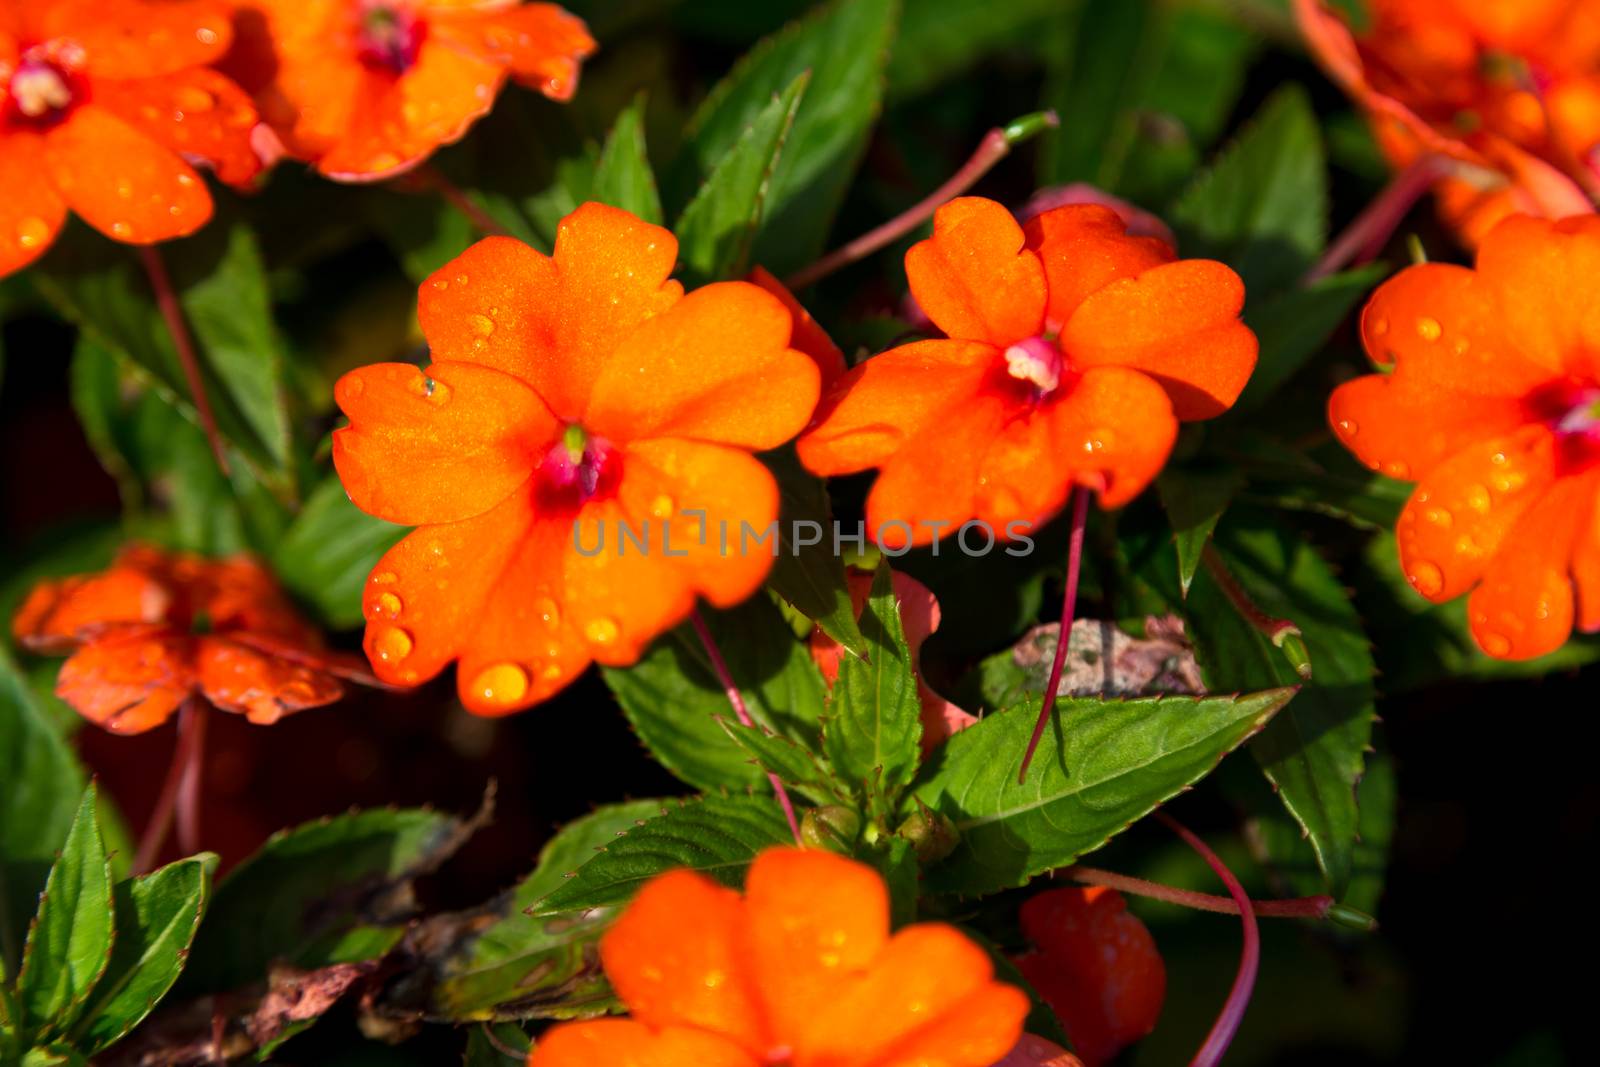 An orange flowers with drops of water on the flowers